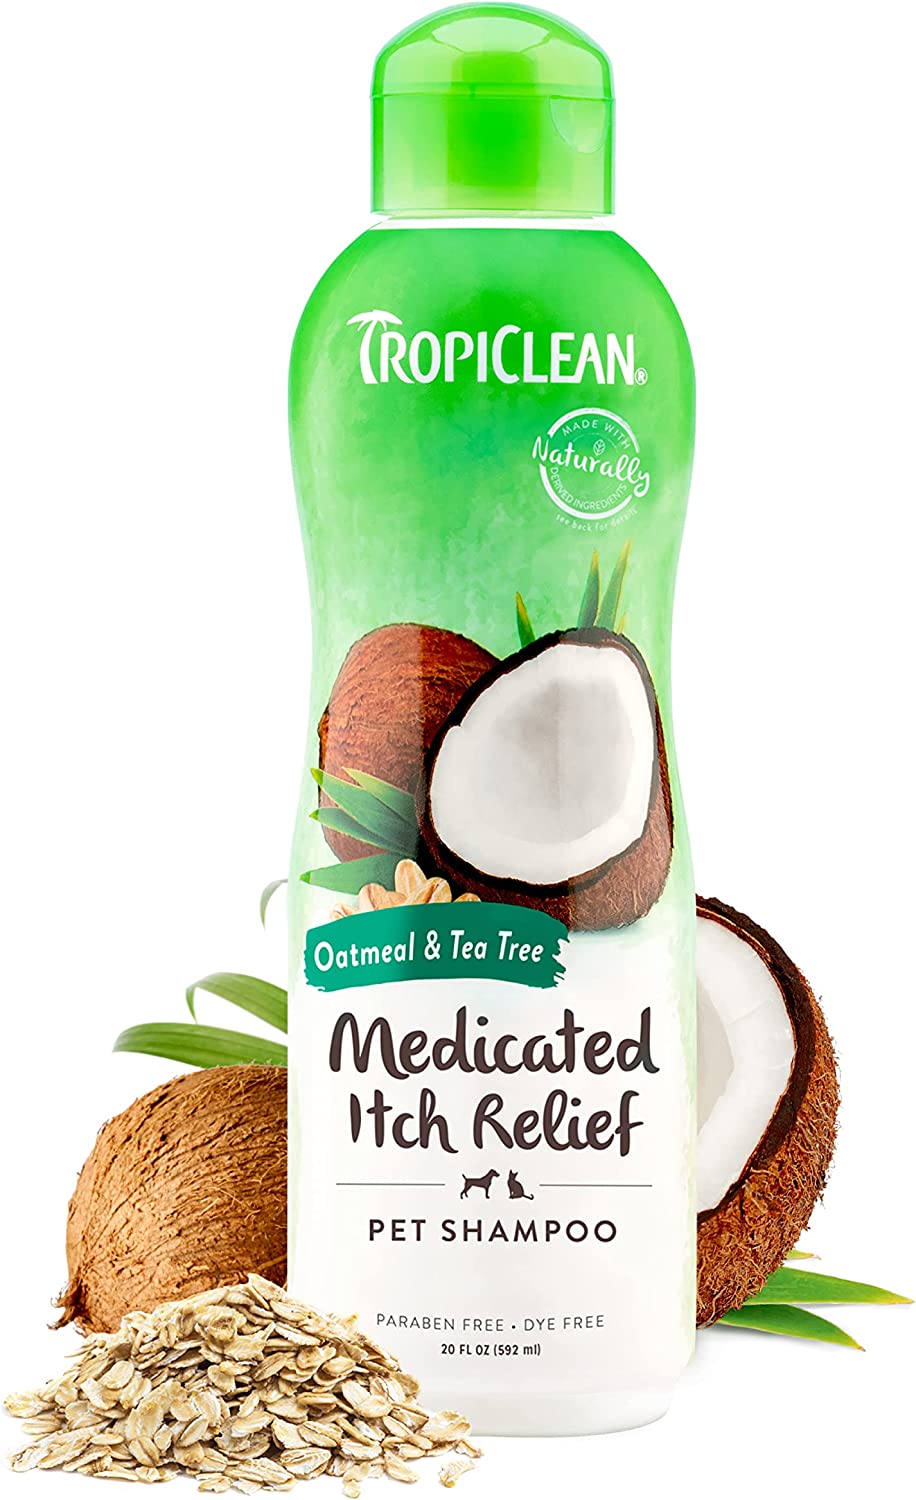 Tropiclean Medicated Itch Relief Pet Shampoo - BlackPaw - For Every Adventure